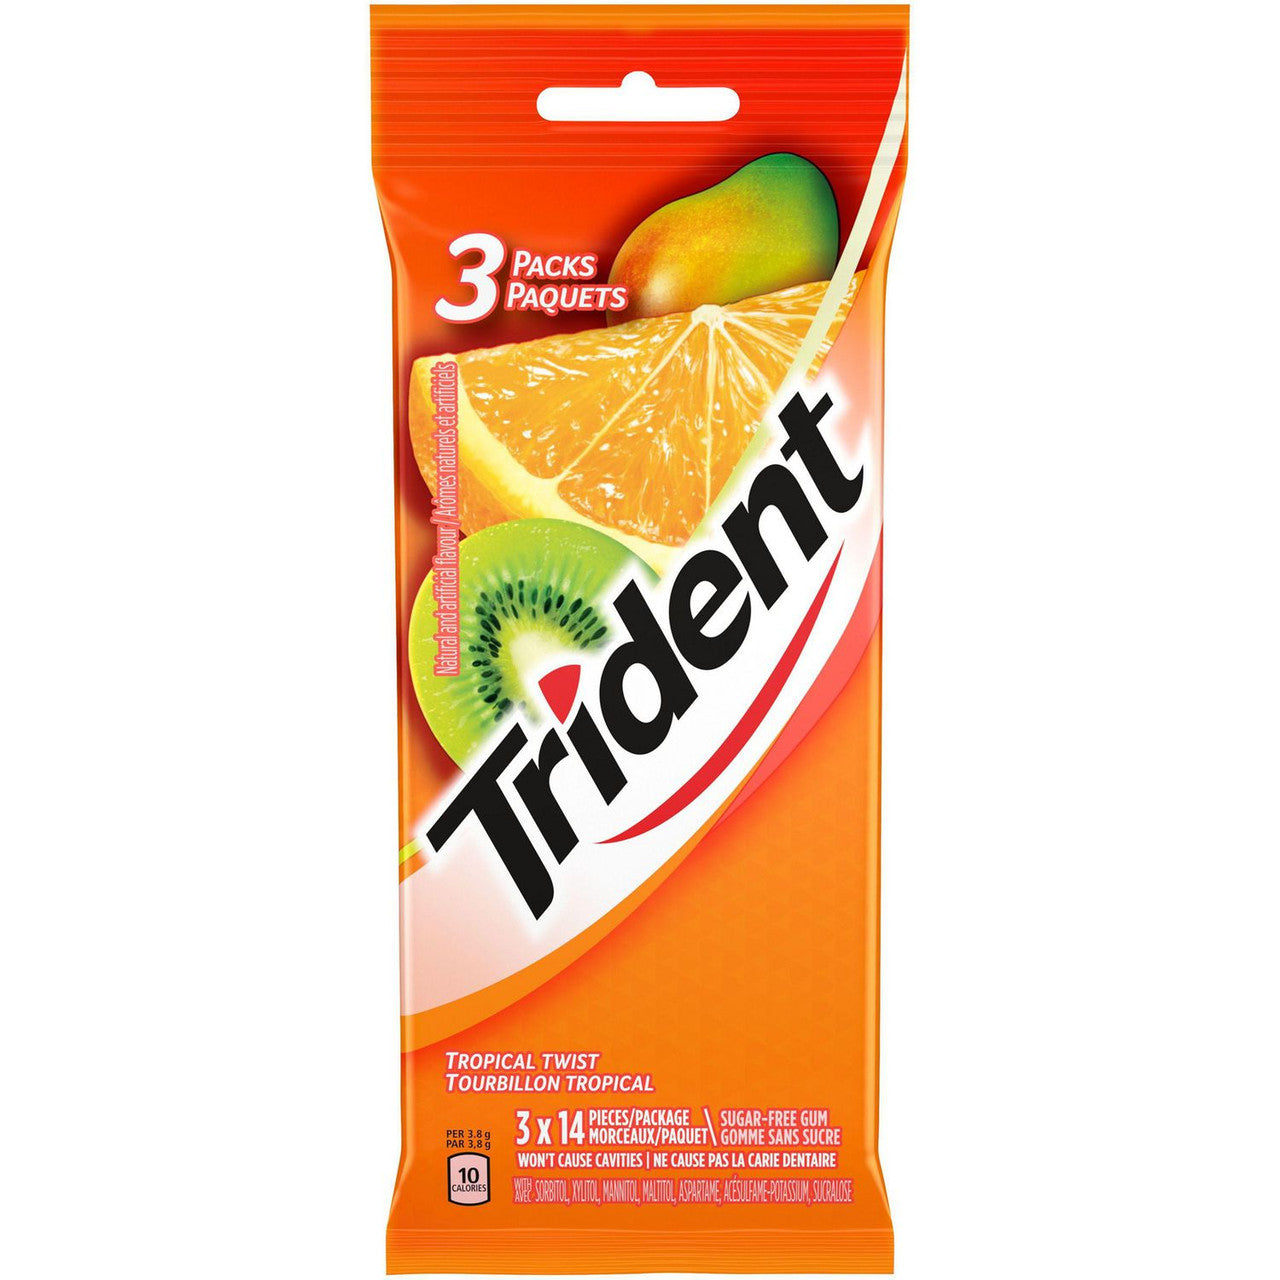 Trident Sugar-Free Gum, Tropical Twist Mulitpack, 3-pack x 14 pieces {Imported from Canada}